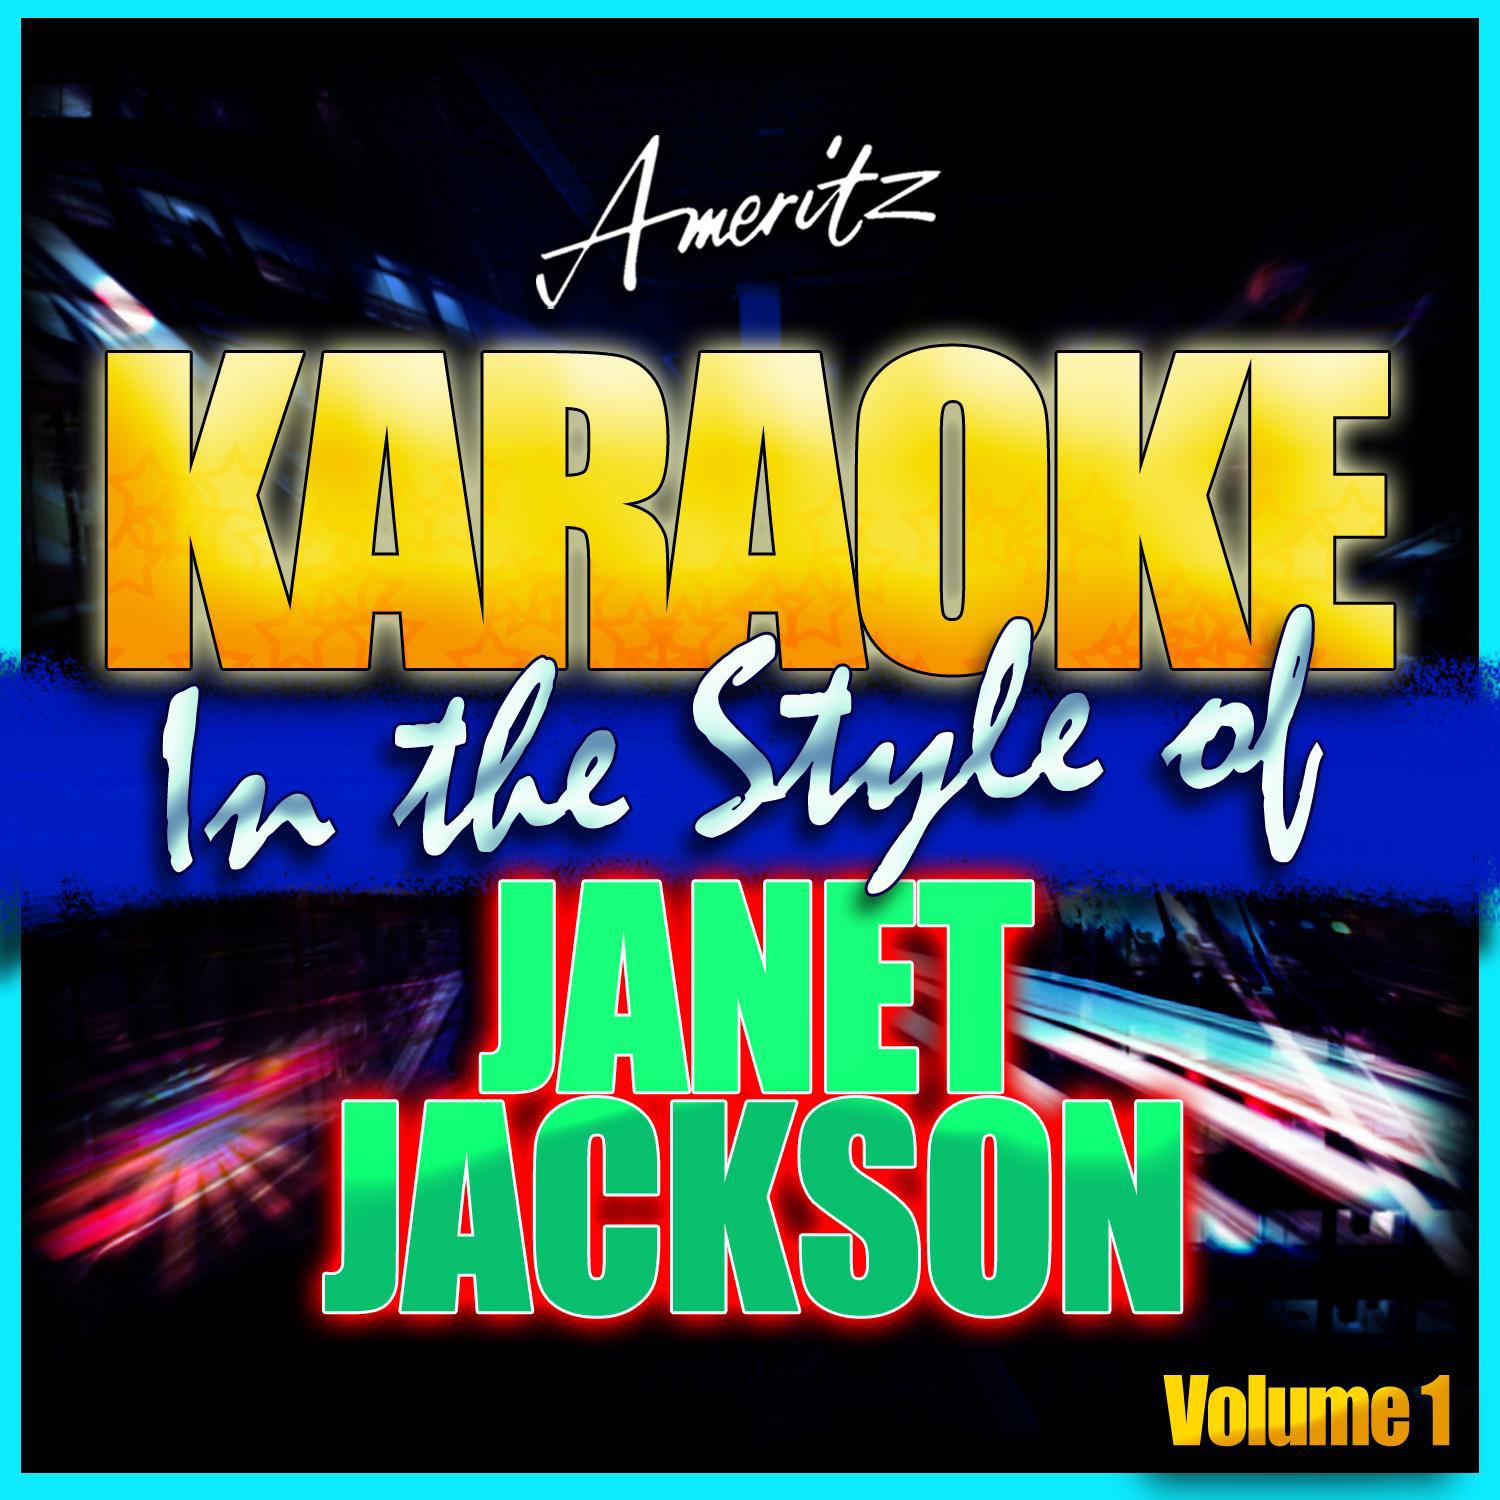 Just a Little While (In the Style of Janet Jackson) [Karaoke Version]